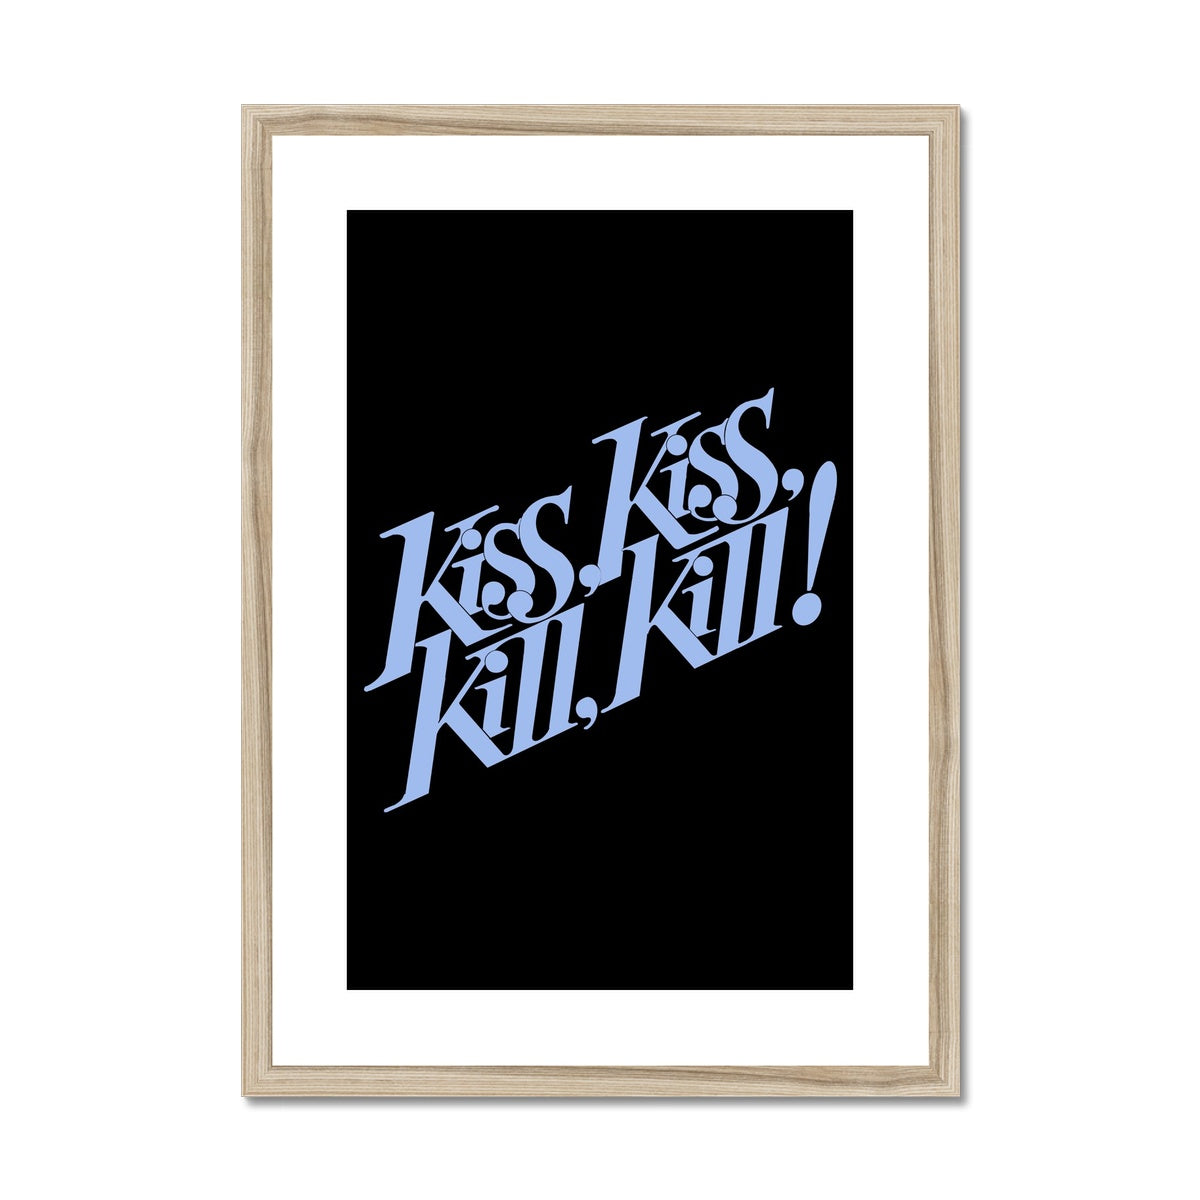 © les muses / Cool vintage typography art prints drawing from 90s grunge, girly Y2K and groovy 70s aesthetics. Retro style wall art and funky posters for trendy apartment or dorm decor with a killer aesthetic.